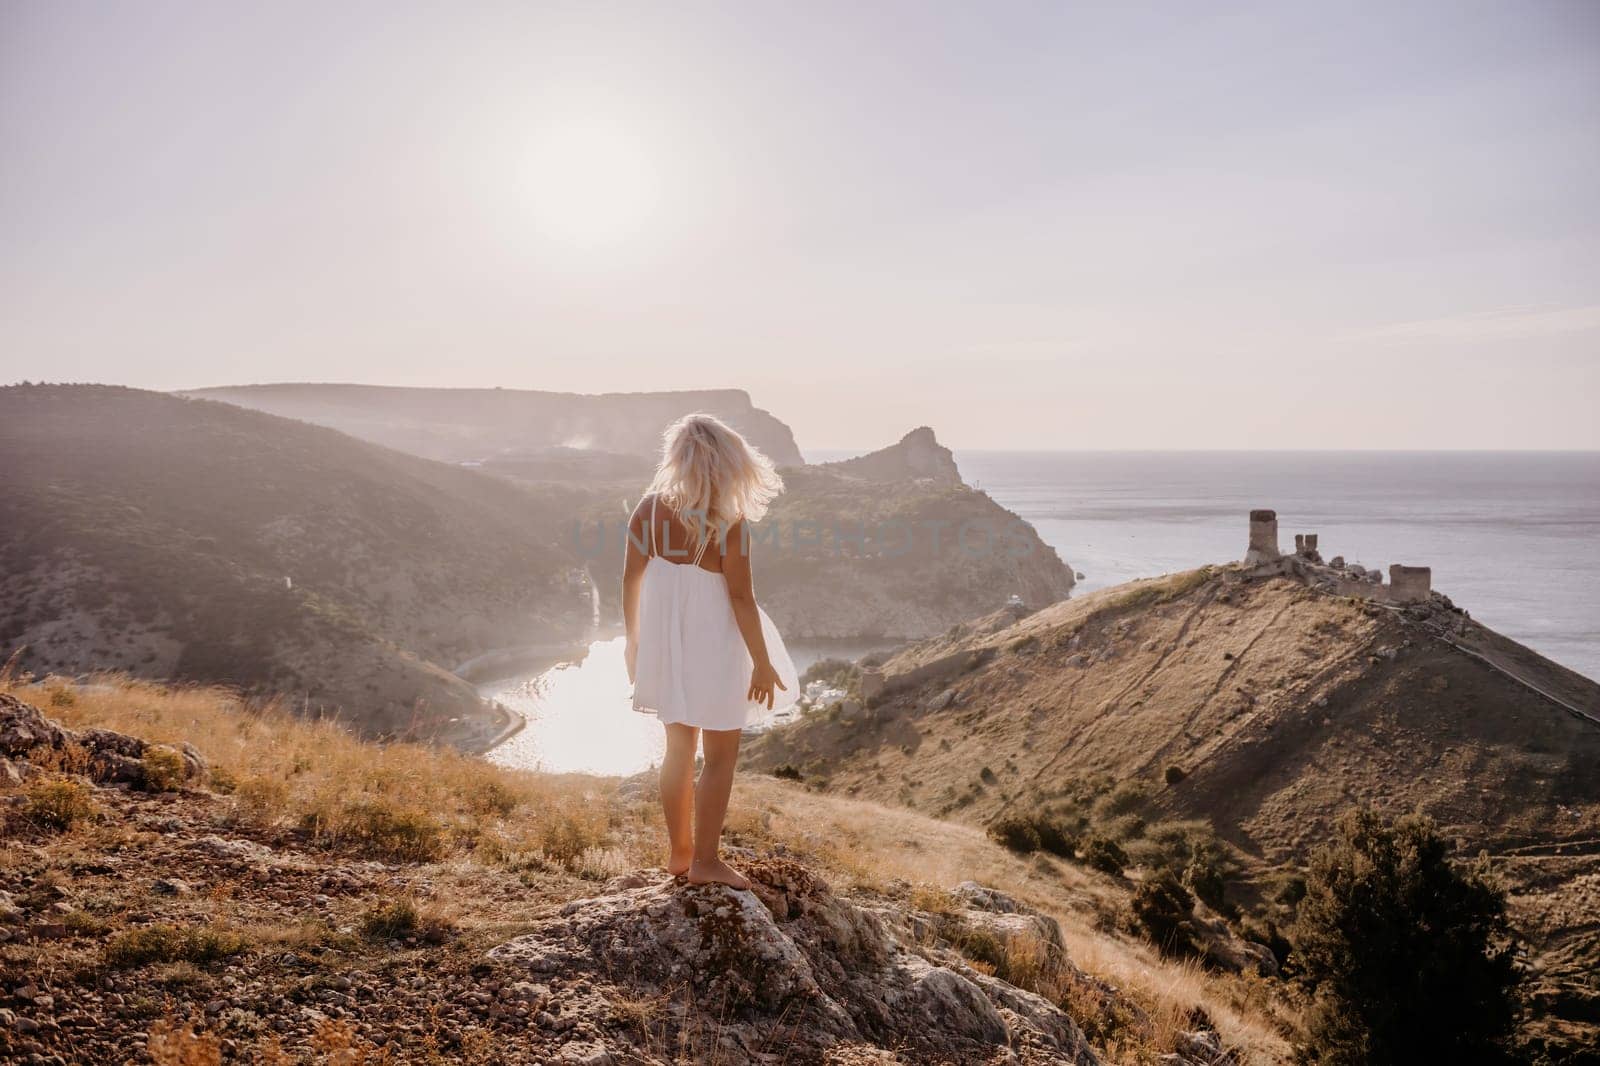 A woman stands on a hill overlooking a body of water. The sky is clear and the sun is shining brightly. The woman is enjoying the view and the peaceful atmosphere